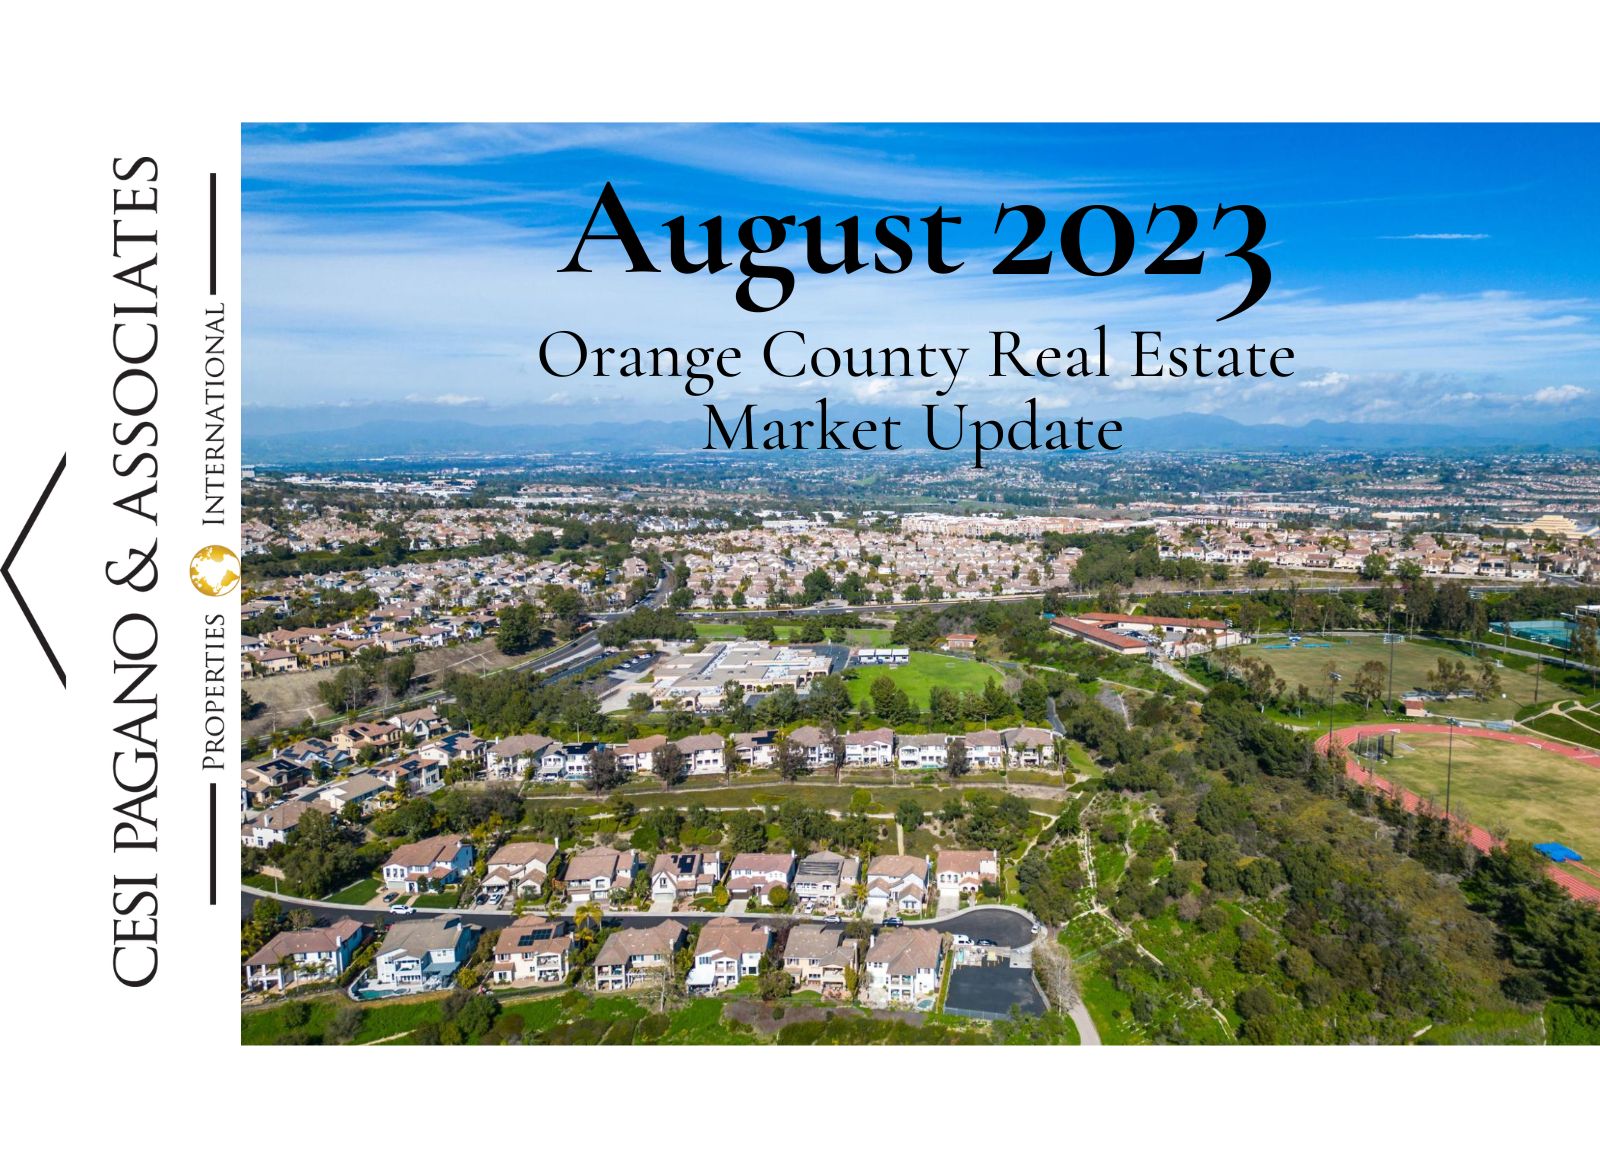 Orange County Real Estate Update August 2023